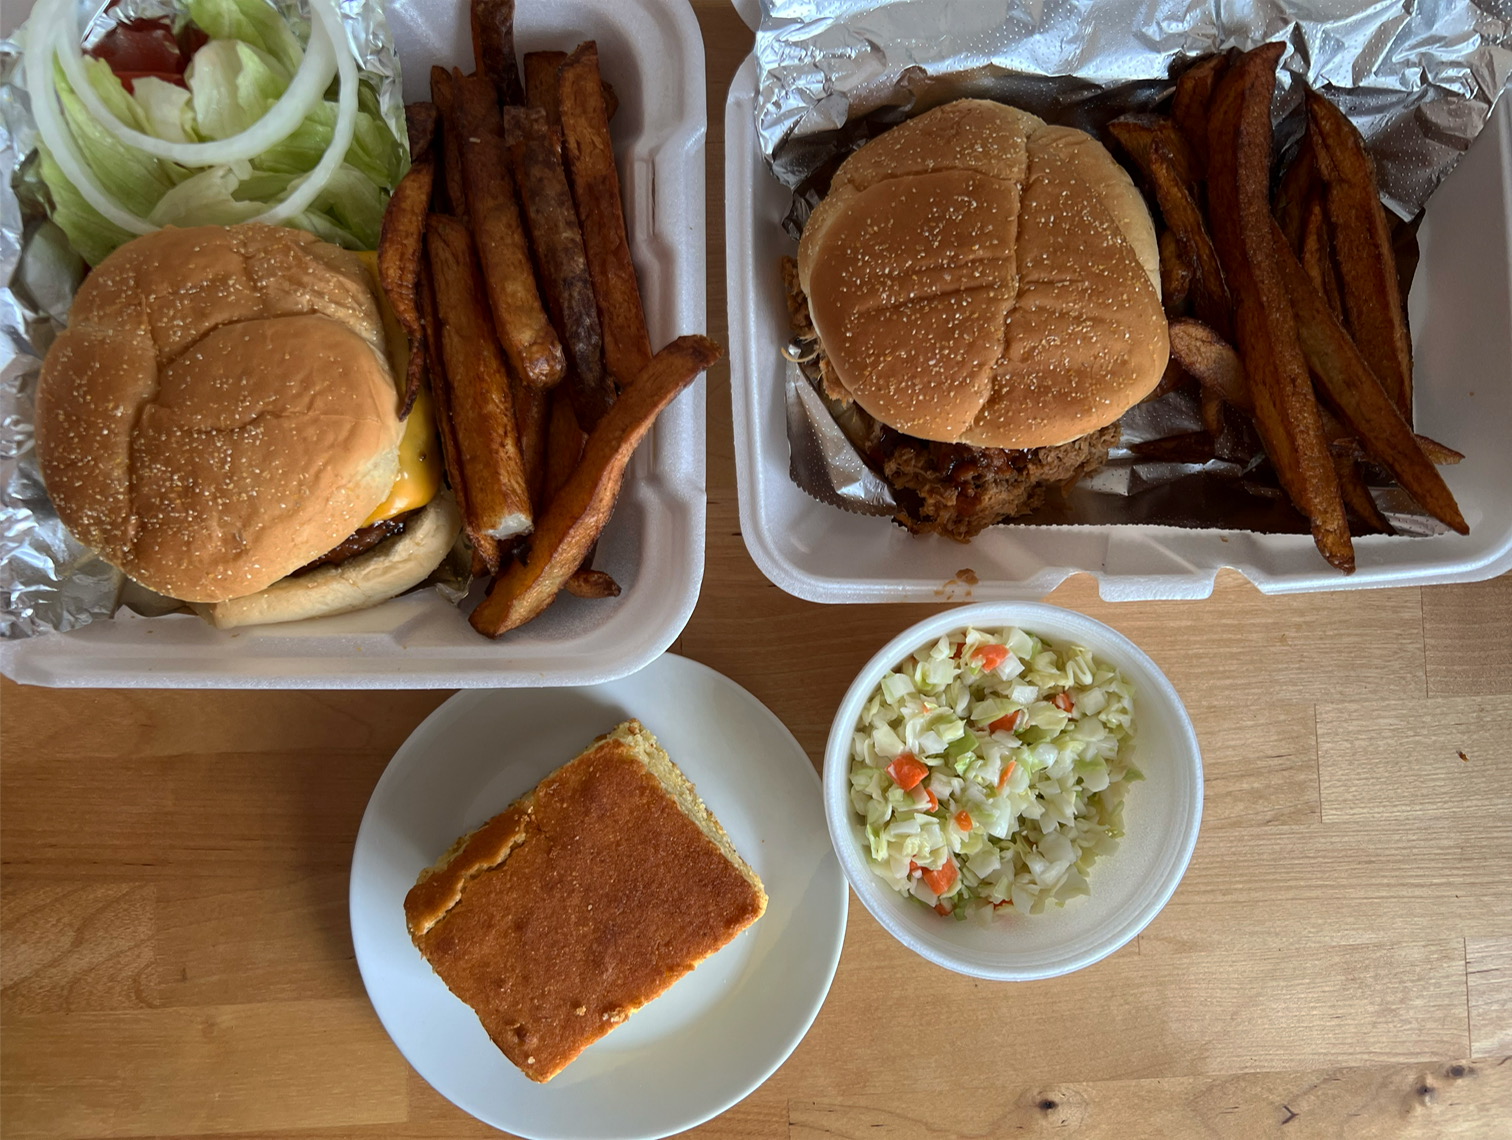 On a butcher block counter, there is a takeout order of burger and fries, pulled pork sandwich and fries, cornbread, and coleselaw from Sooie Bros. Bar B Que Joint. Photo by Alyssa Buckley.